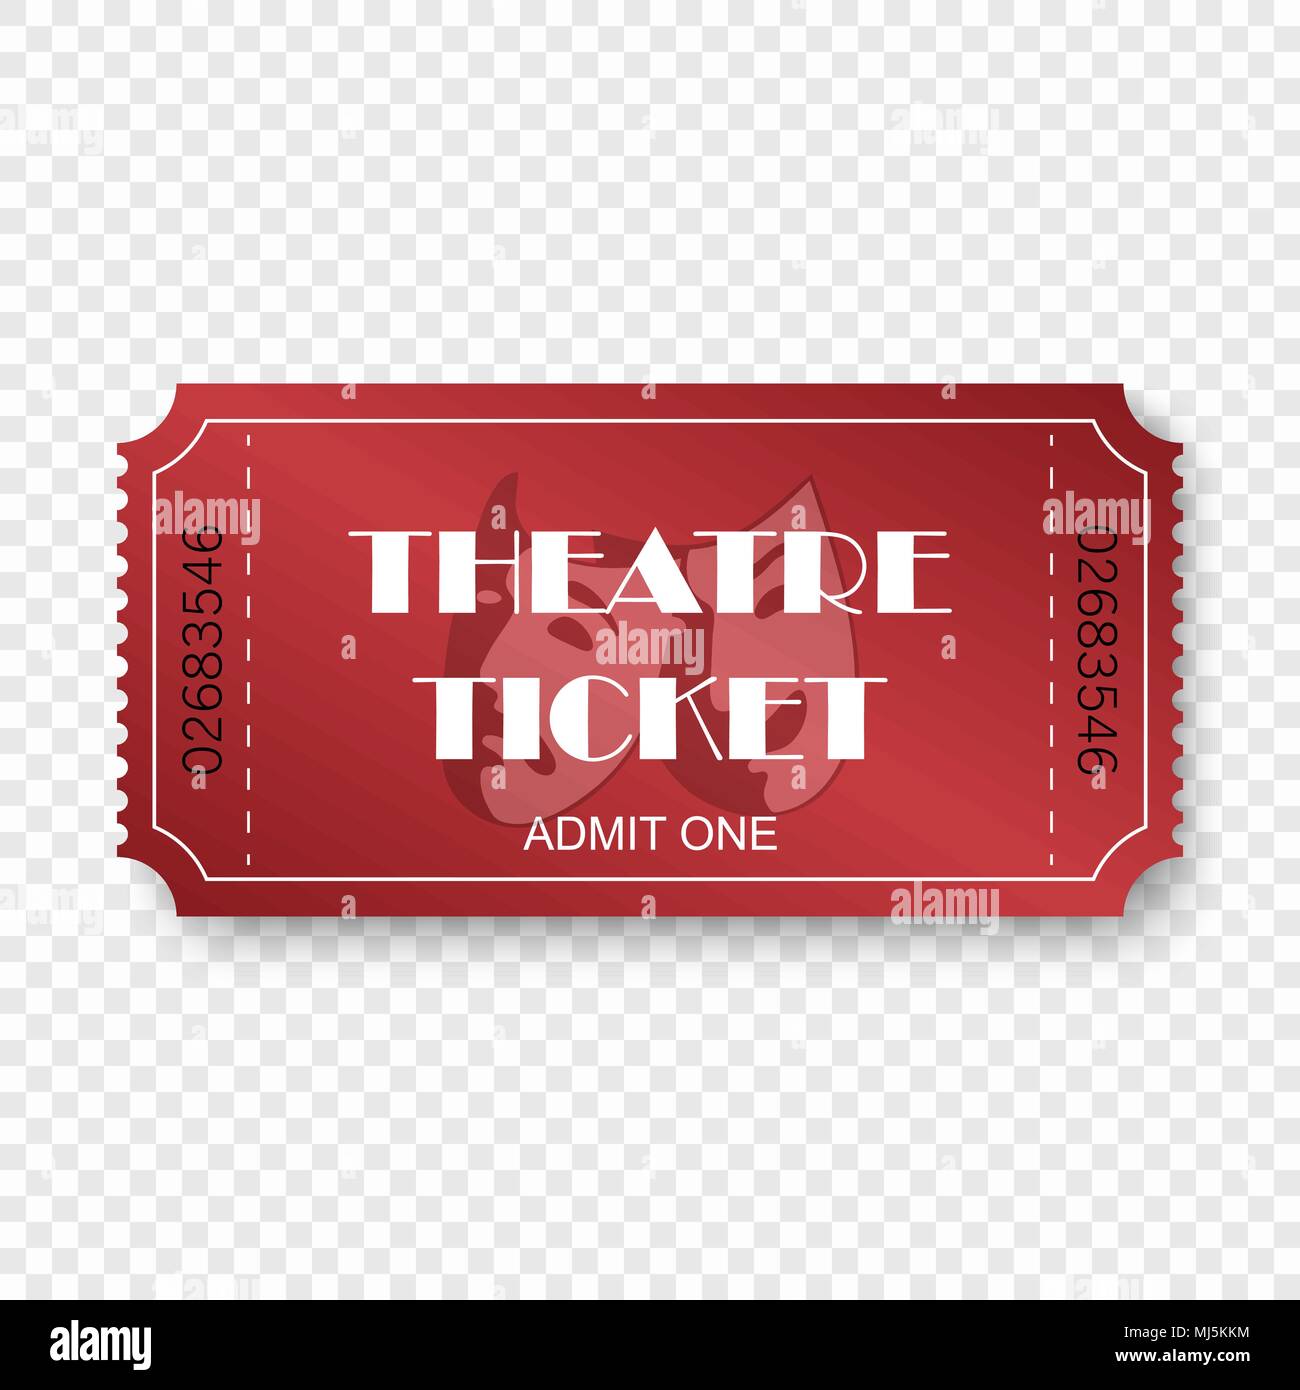 Theatre ticket isolated on transparent background. Stock Vector